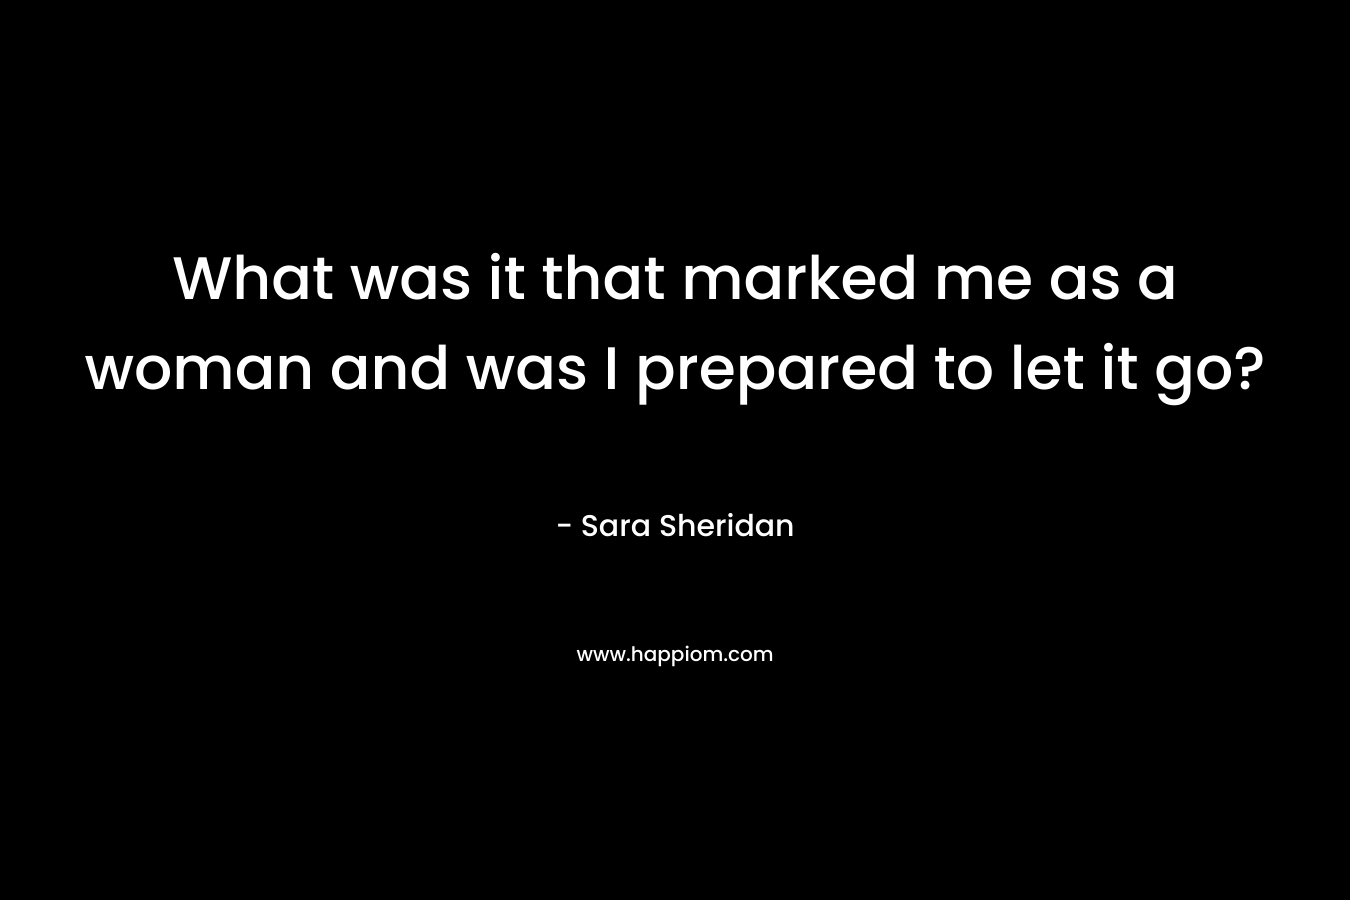 What was it that marked me as a woman and was I prepared to let it go? – Sara Sheridan